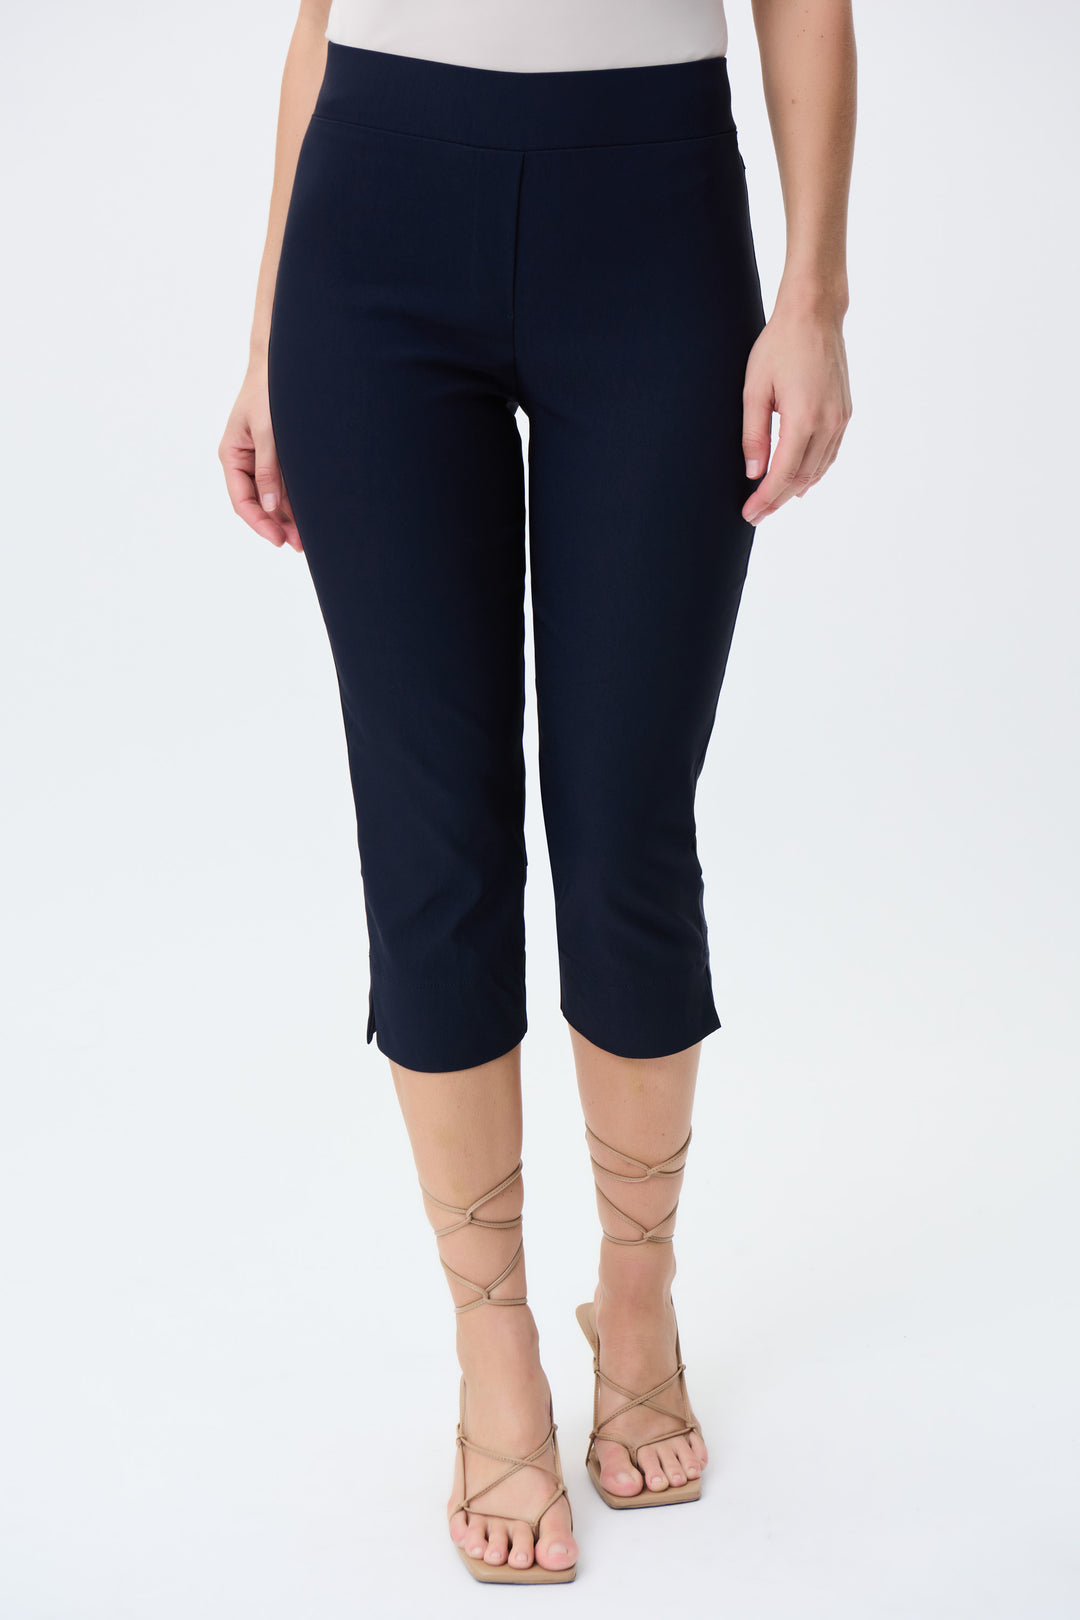 JOSEPH RIBKOFF SPRING '23 women's business casual pull-on cropped capri dress pants - midnight blue front